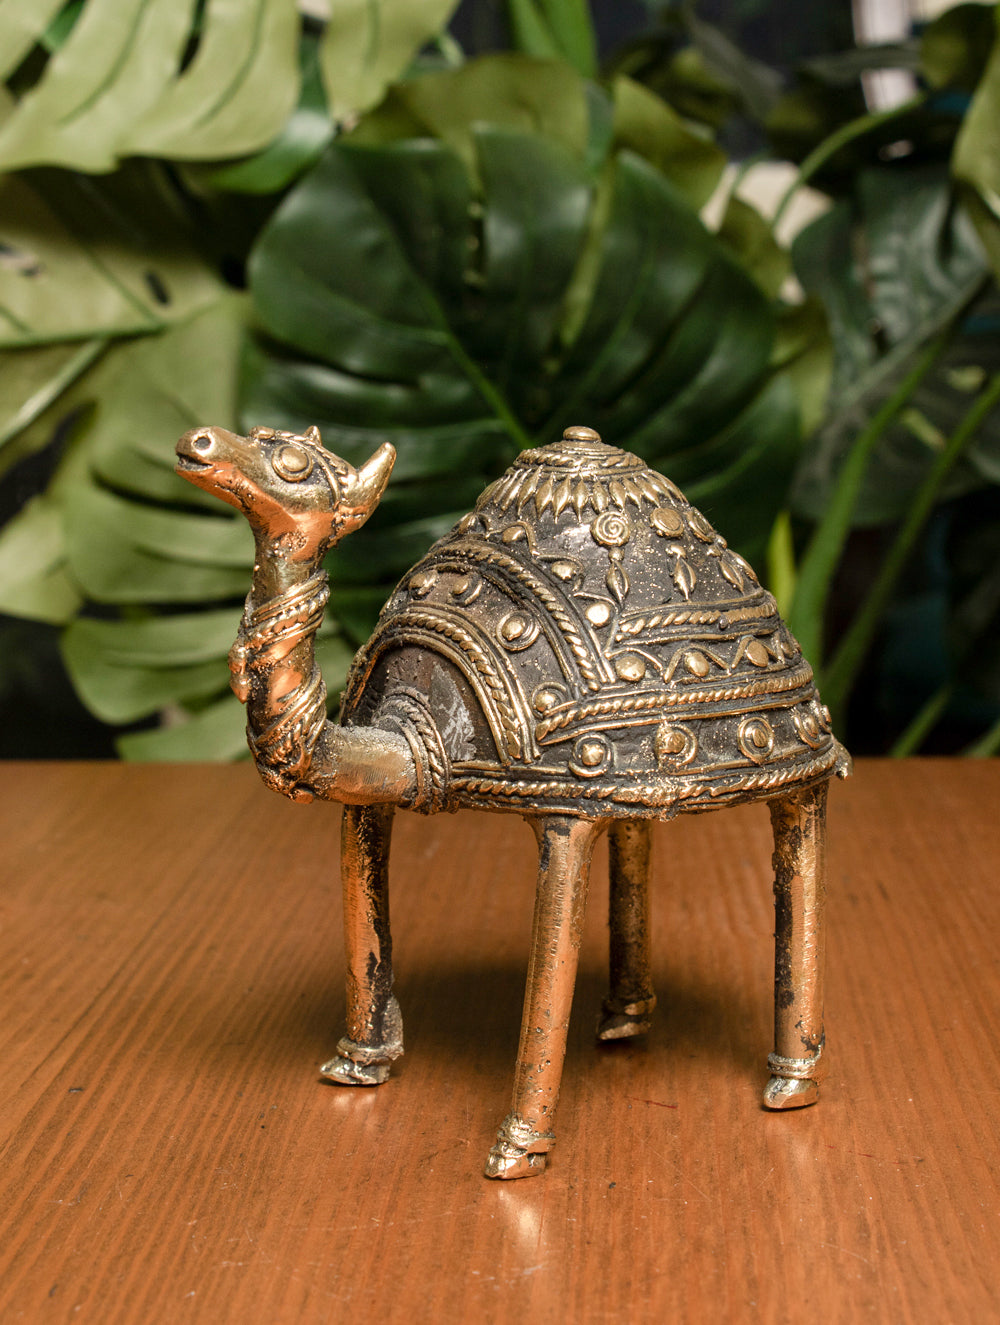 Load image into Gallery viewer, Dhokra Craft Curio (Medium) - Camel - The India Craft House 